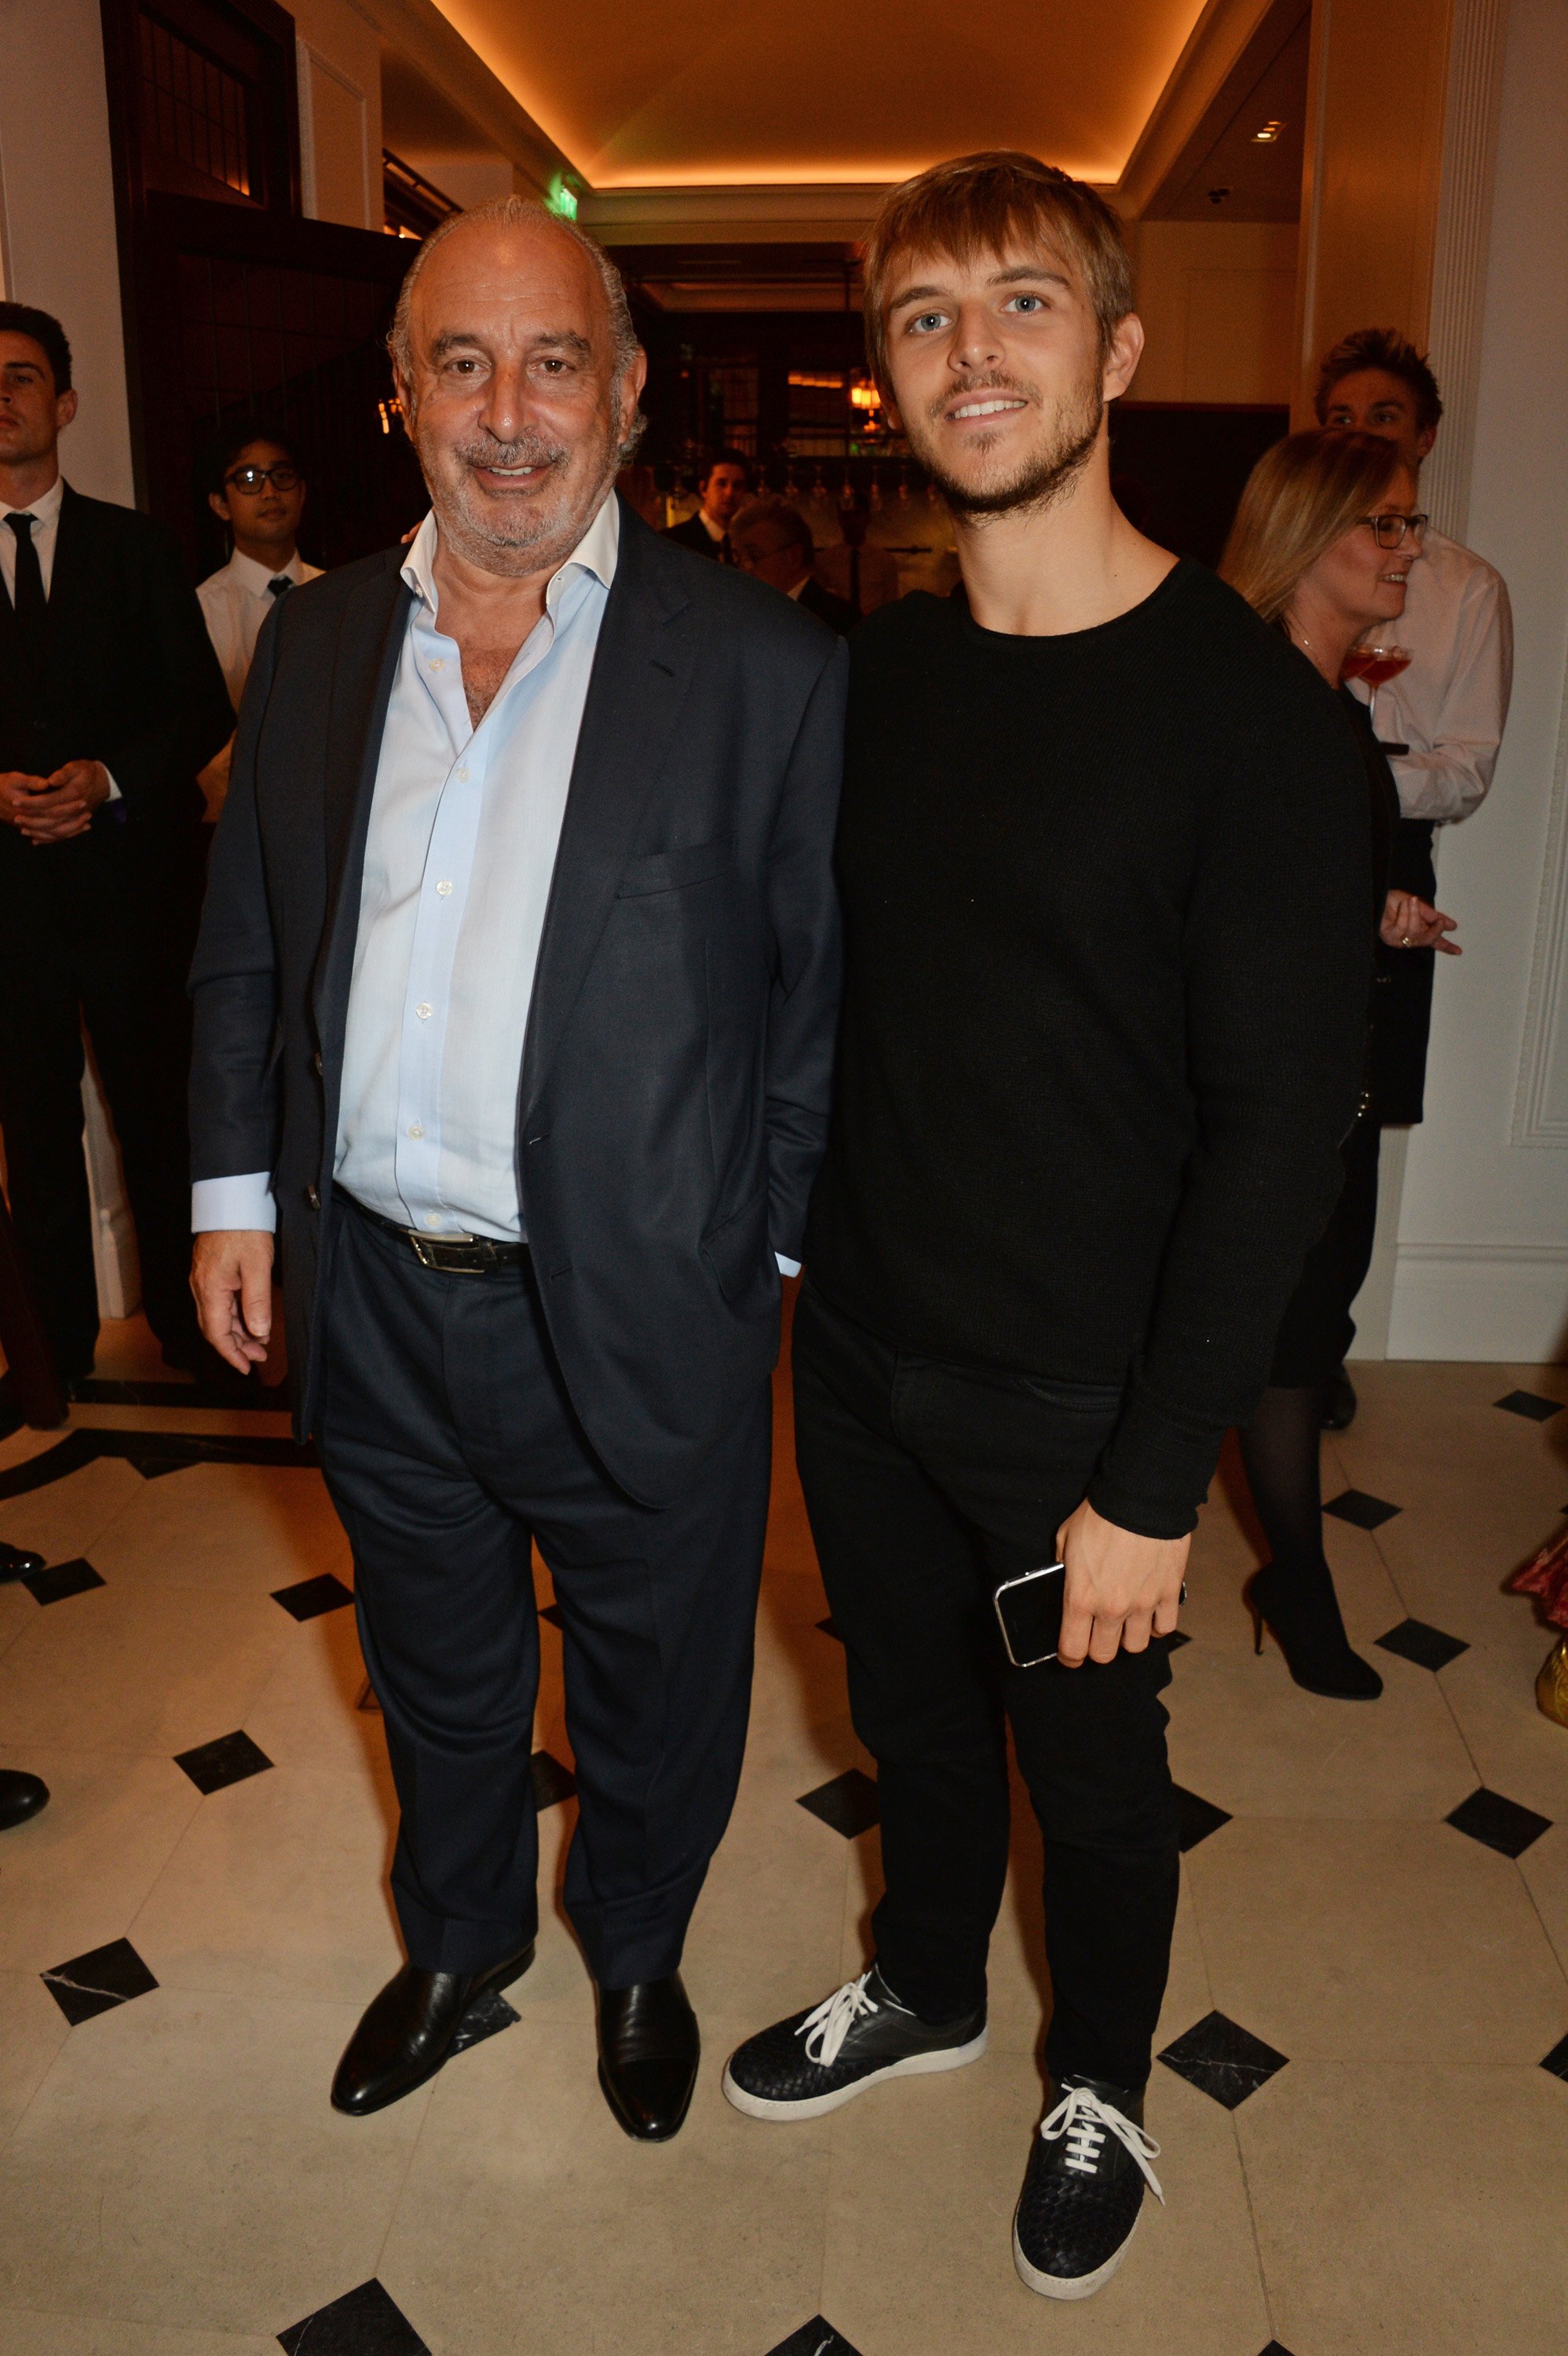 Sir Philip Green and Brandon Green at an event in London on April 18, 2016 | Source: Getty Images